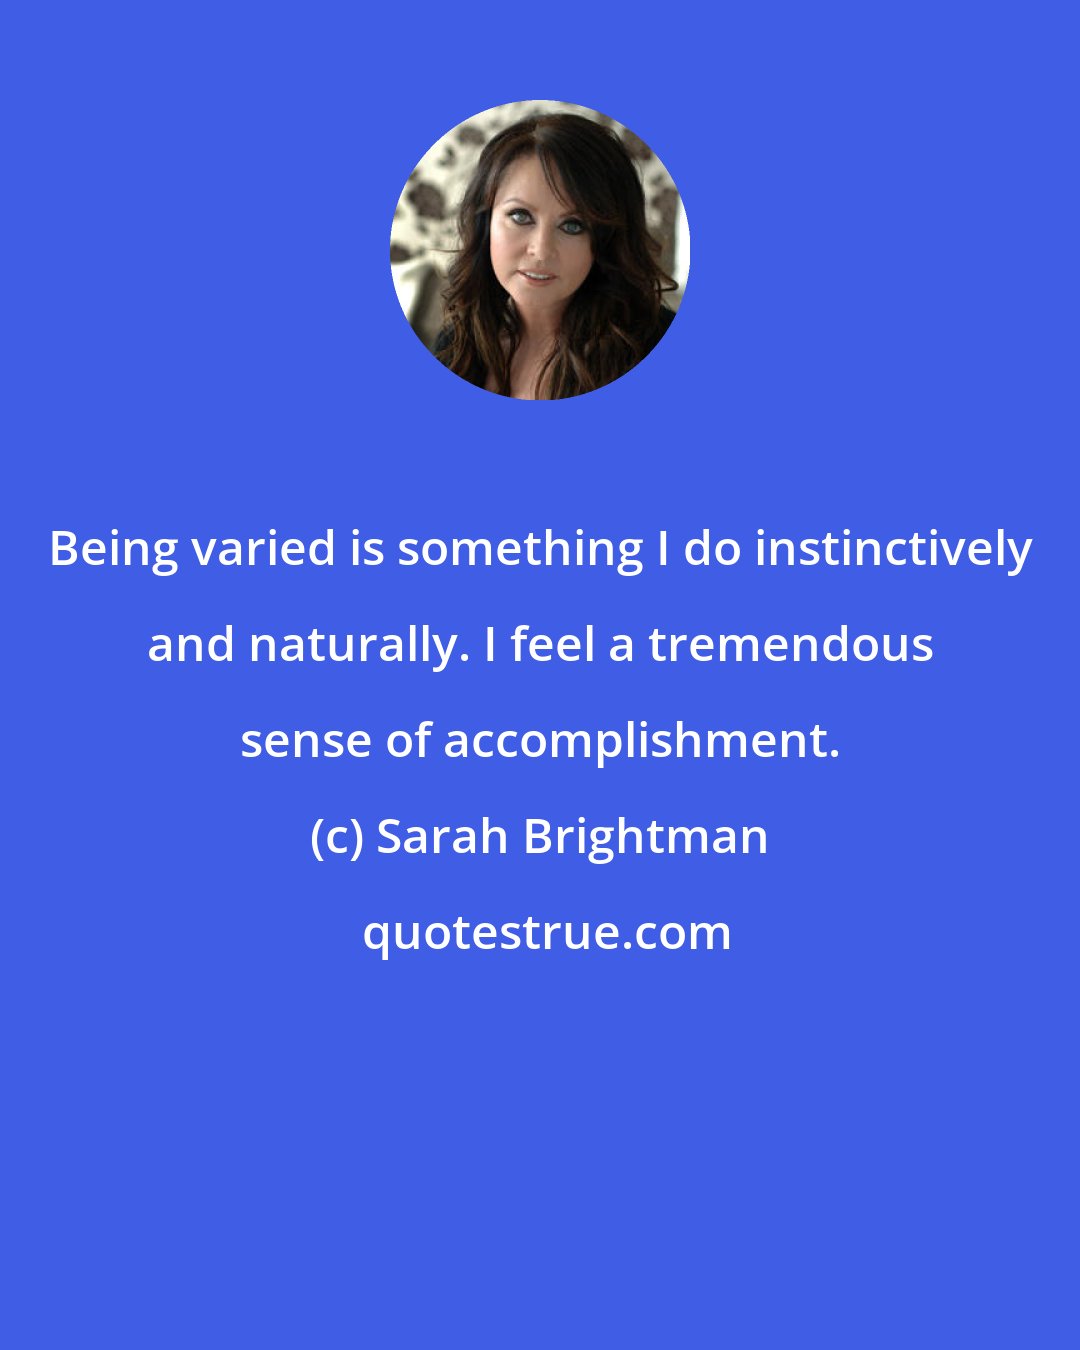 Sarah Brightman: Being varied is something I do instinctively and naturally. I feel a tremendous sense of accomplishment.